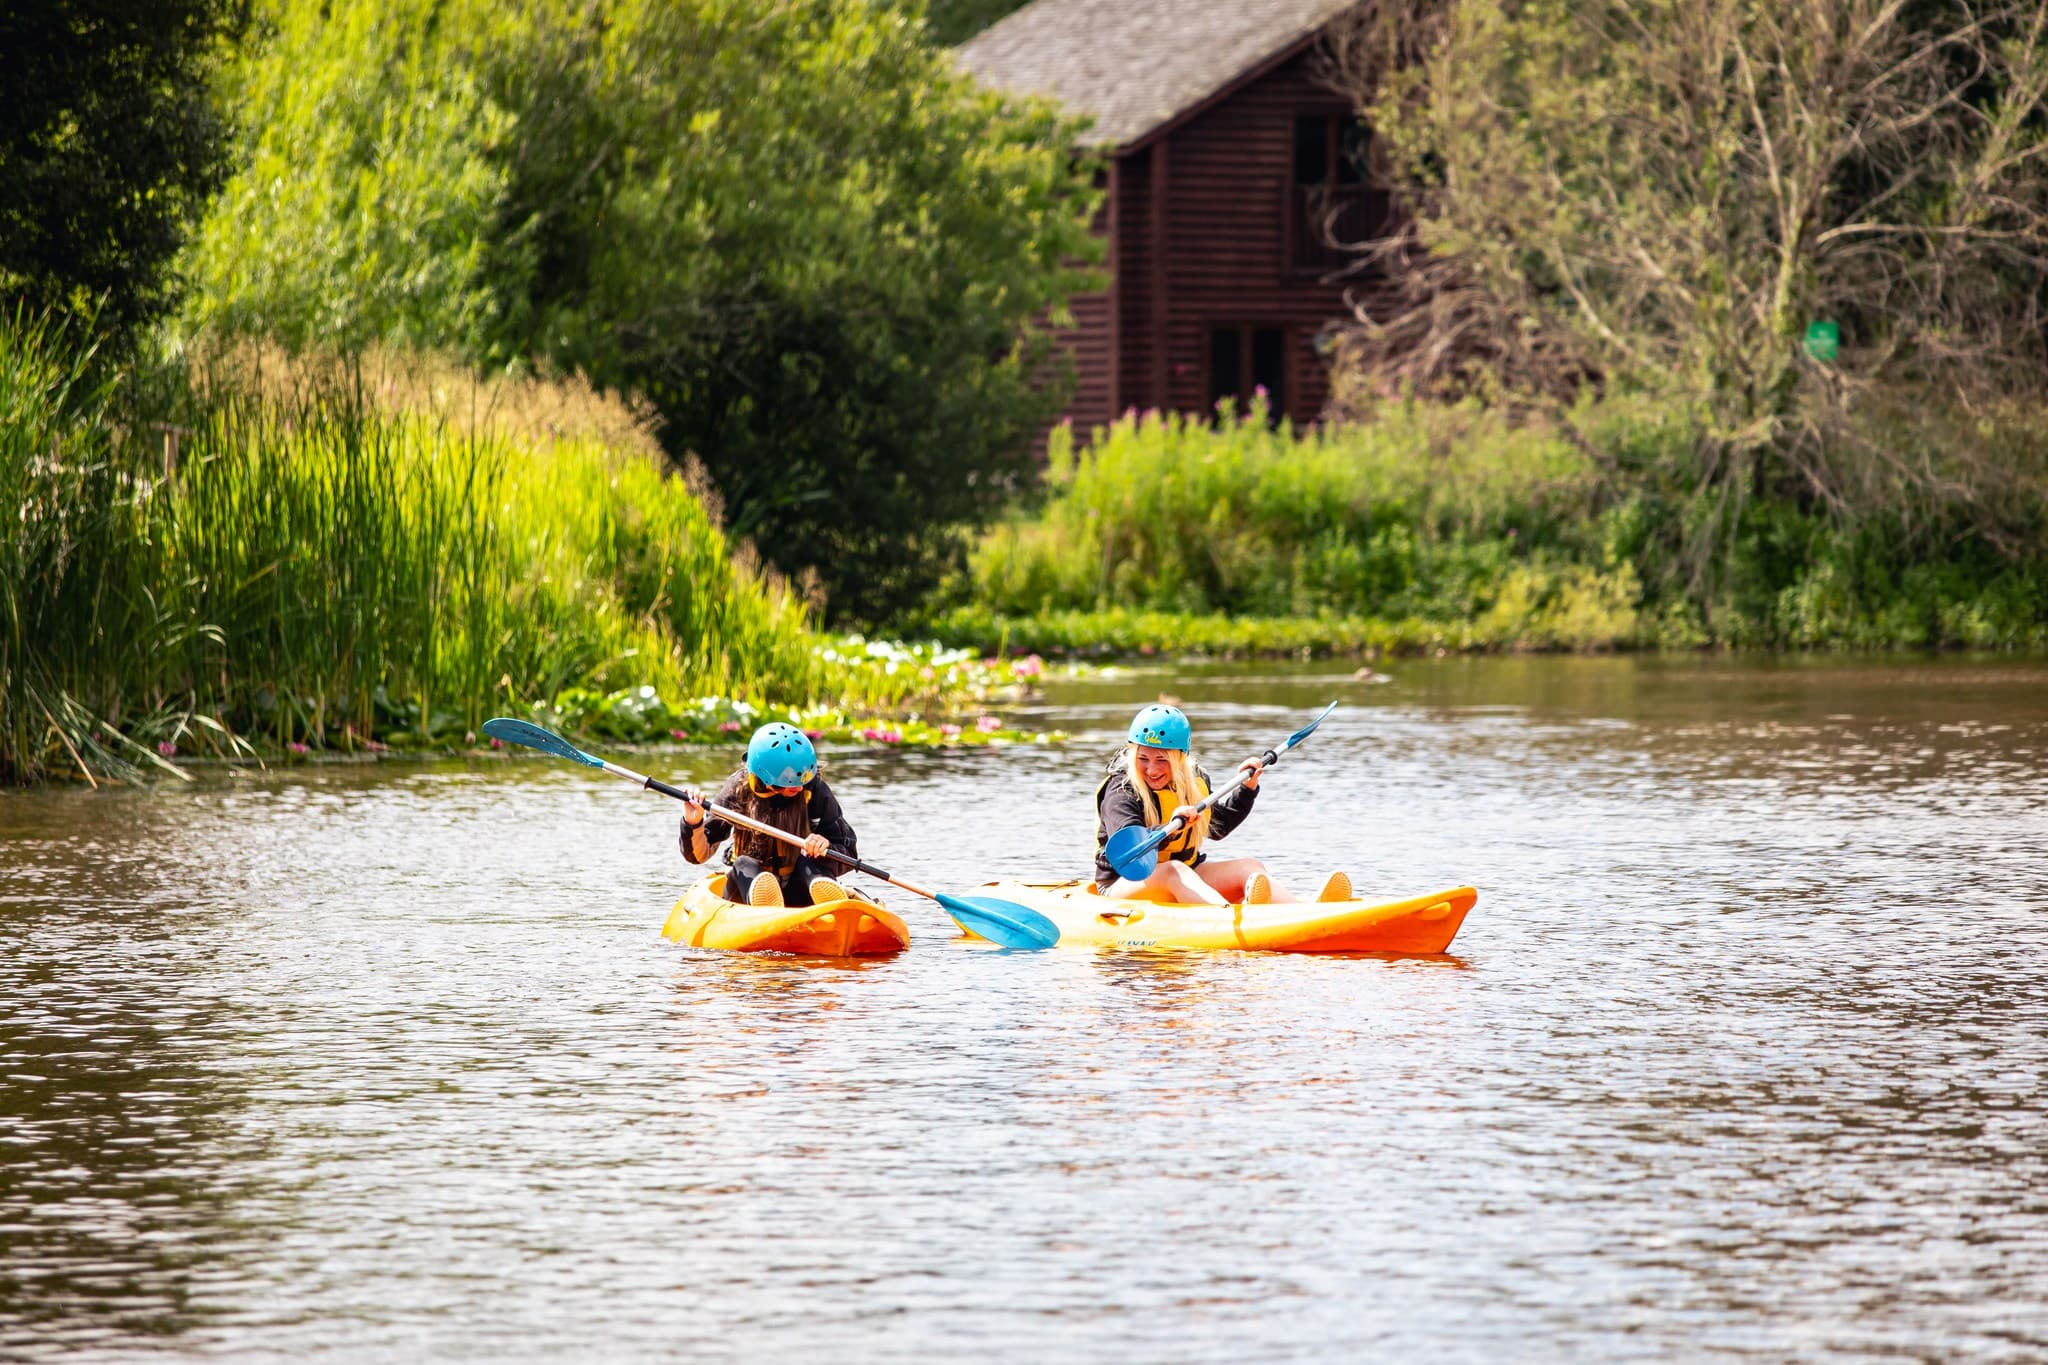 Make a splash this summer kayaking and paddleboarding at our private lake! 🛶

Remember, falling in happens and is perfectly ok, but you might hear some curious quacks from the local ducks! 🦆

#MyBluestoneBreak #FreeRangeFun #Pembrokeshire